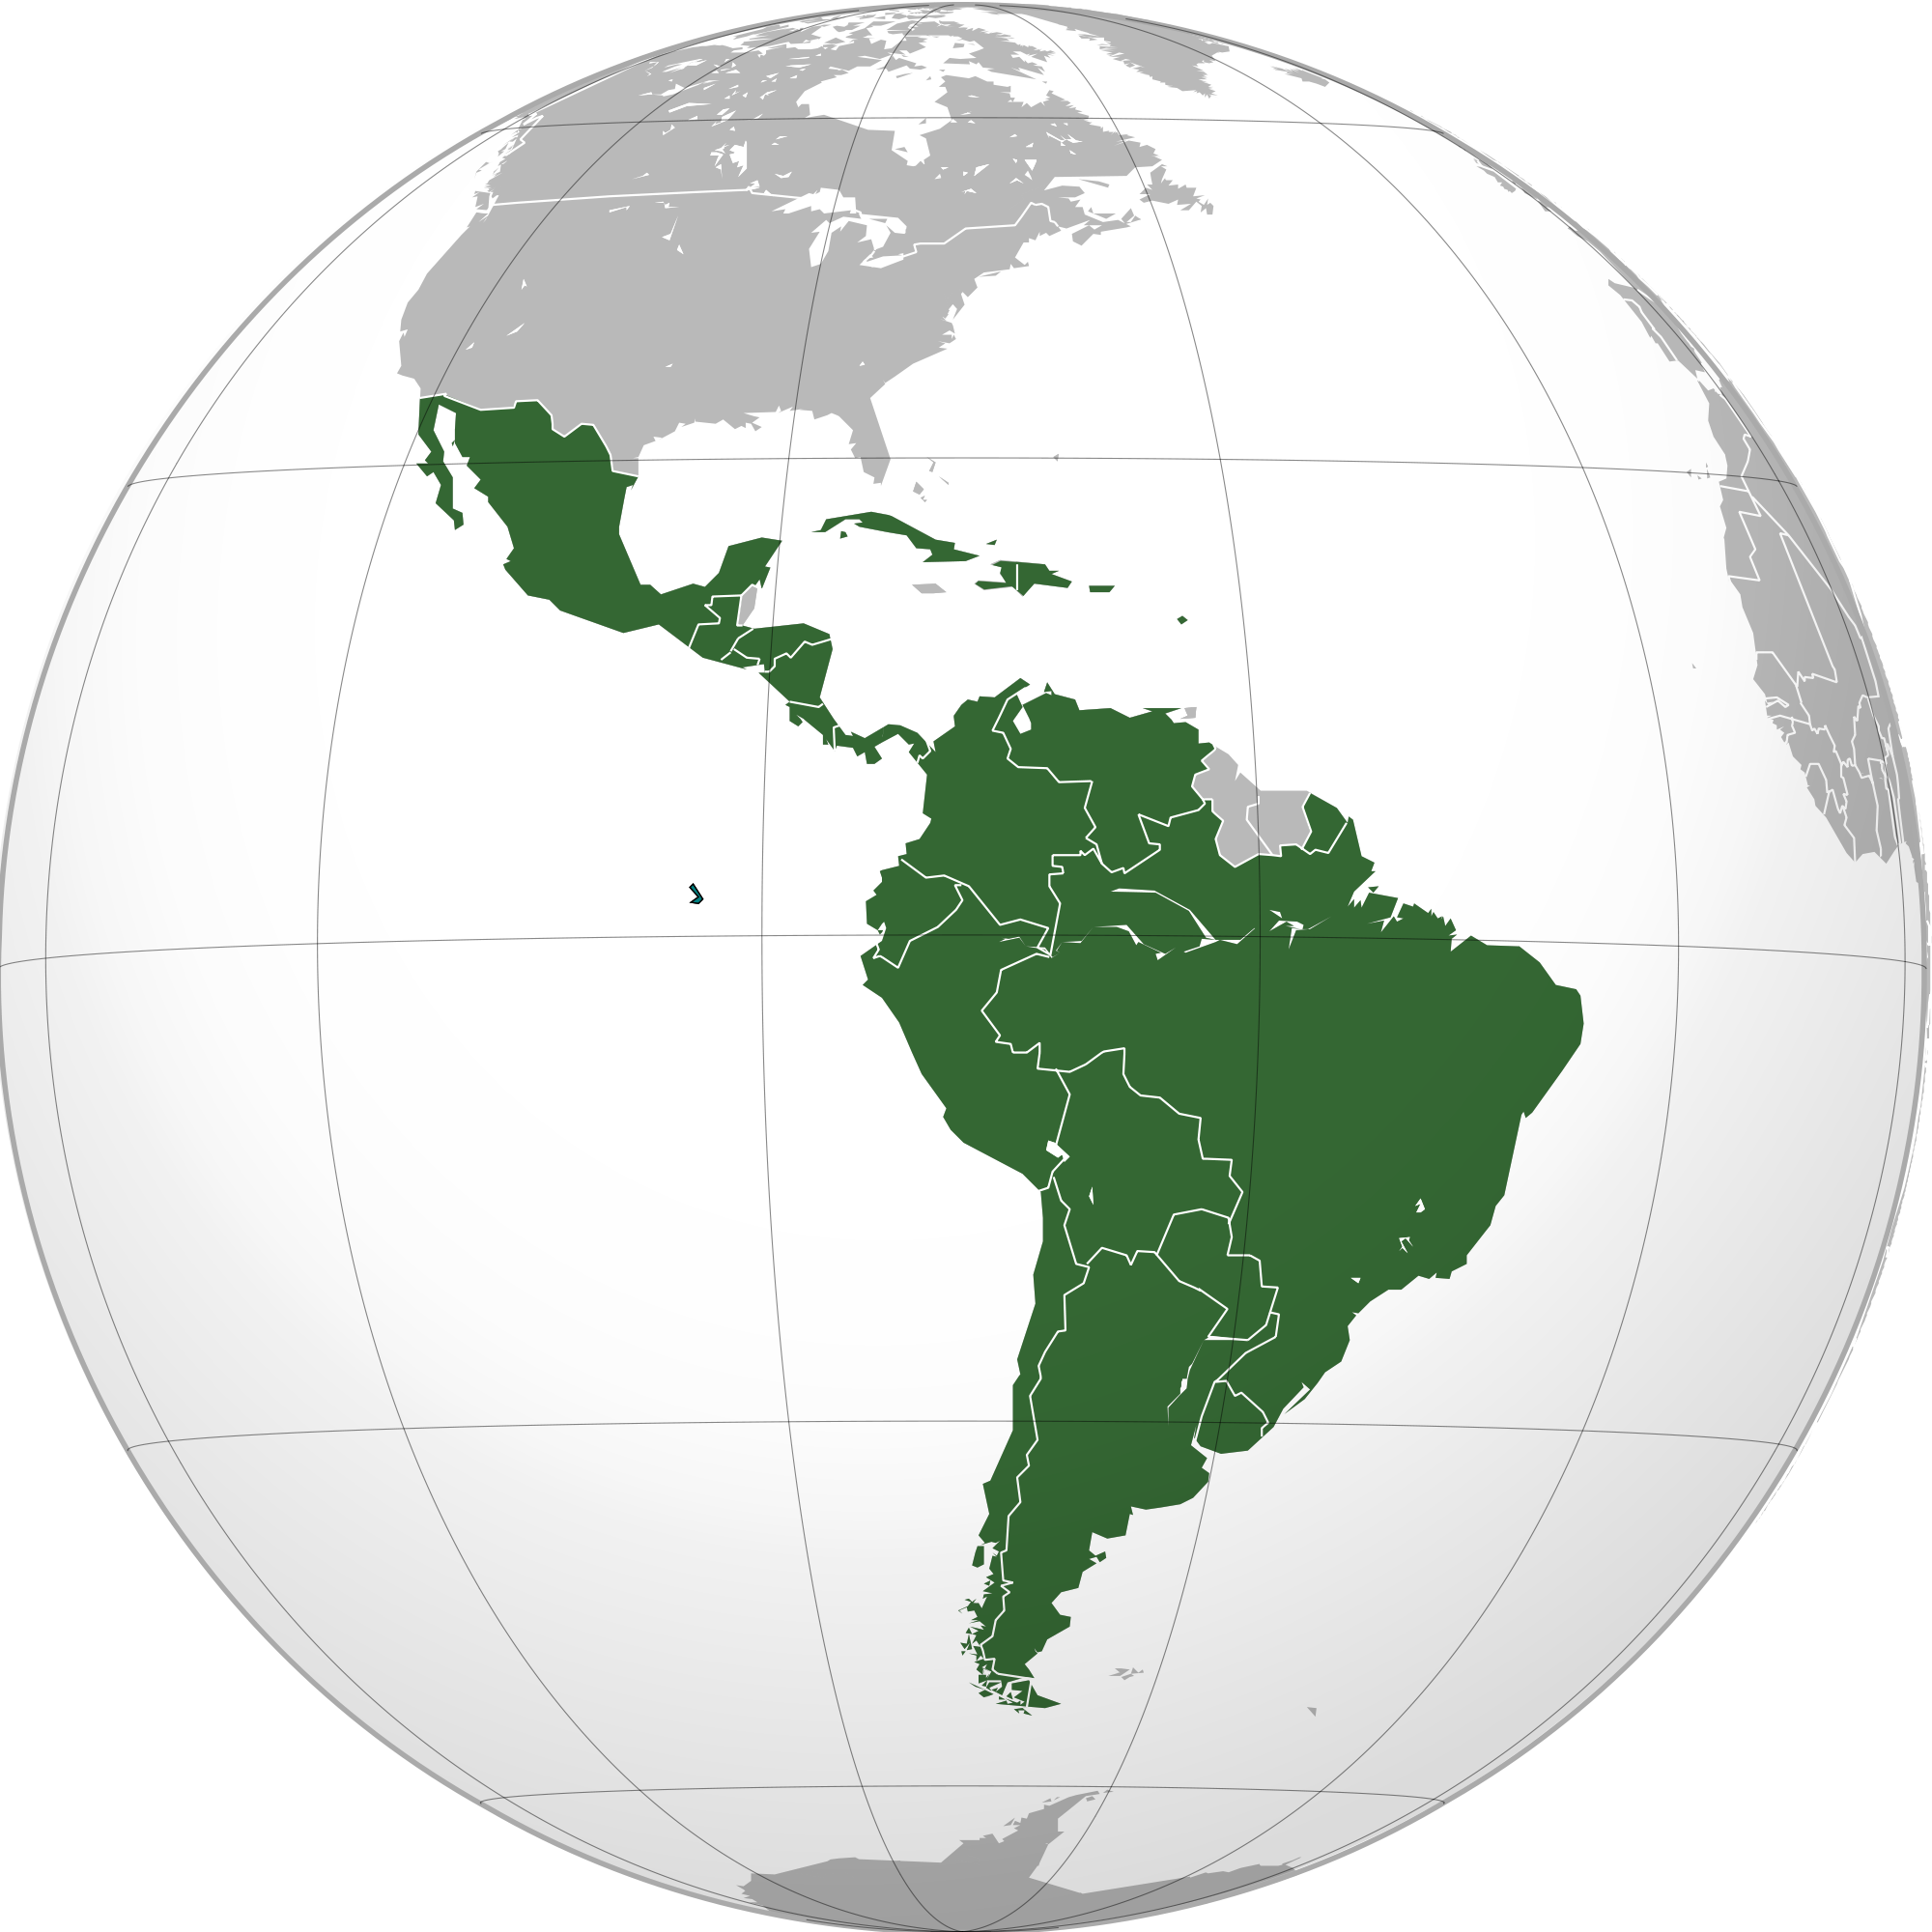 First Quarter M&A Activity Plummets in Latin America as COVID 19 Spreads